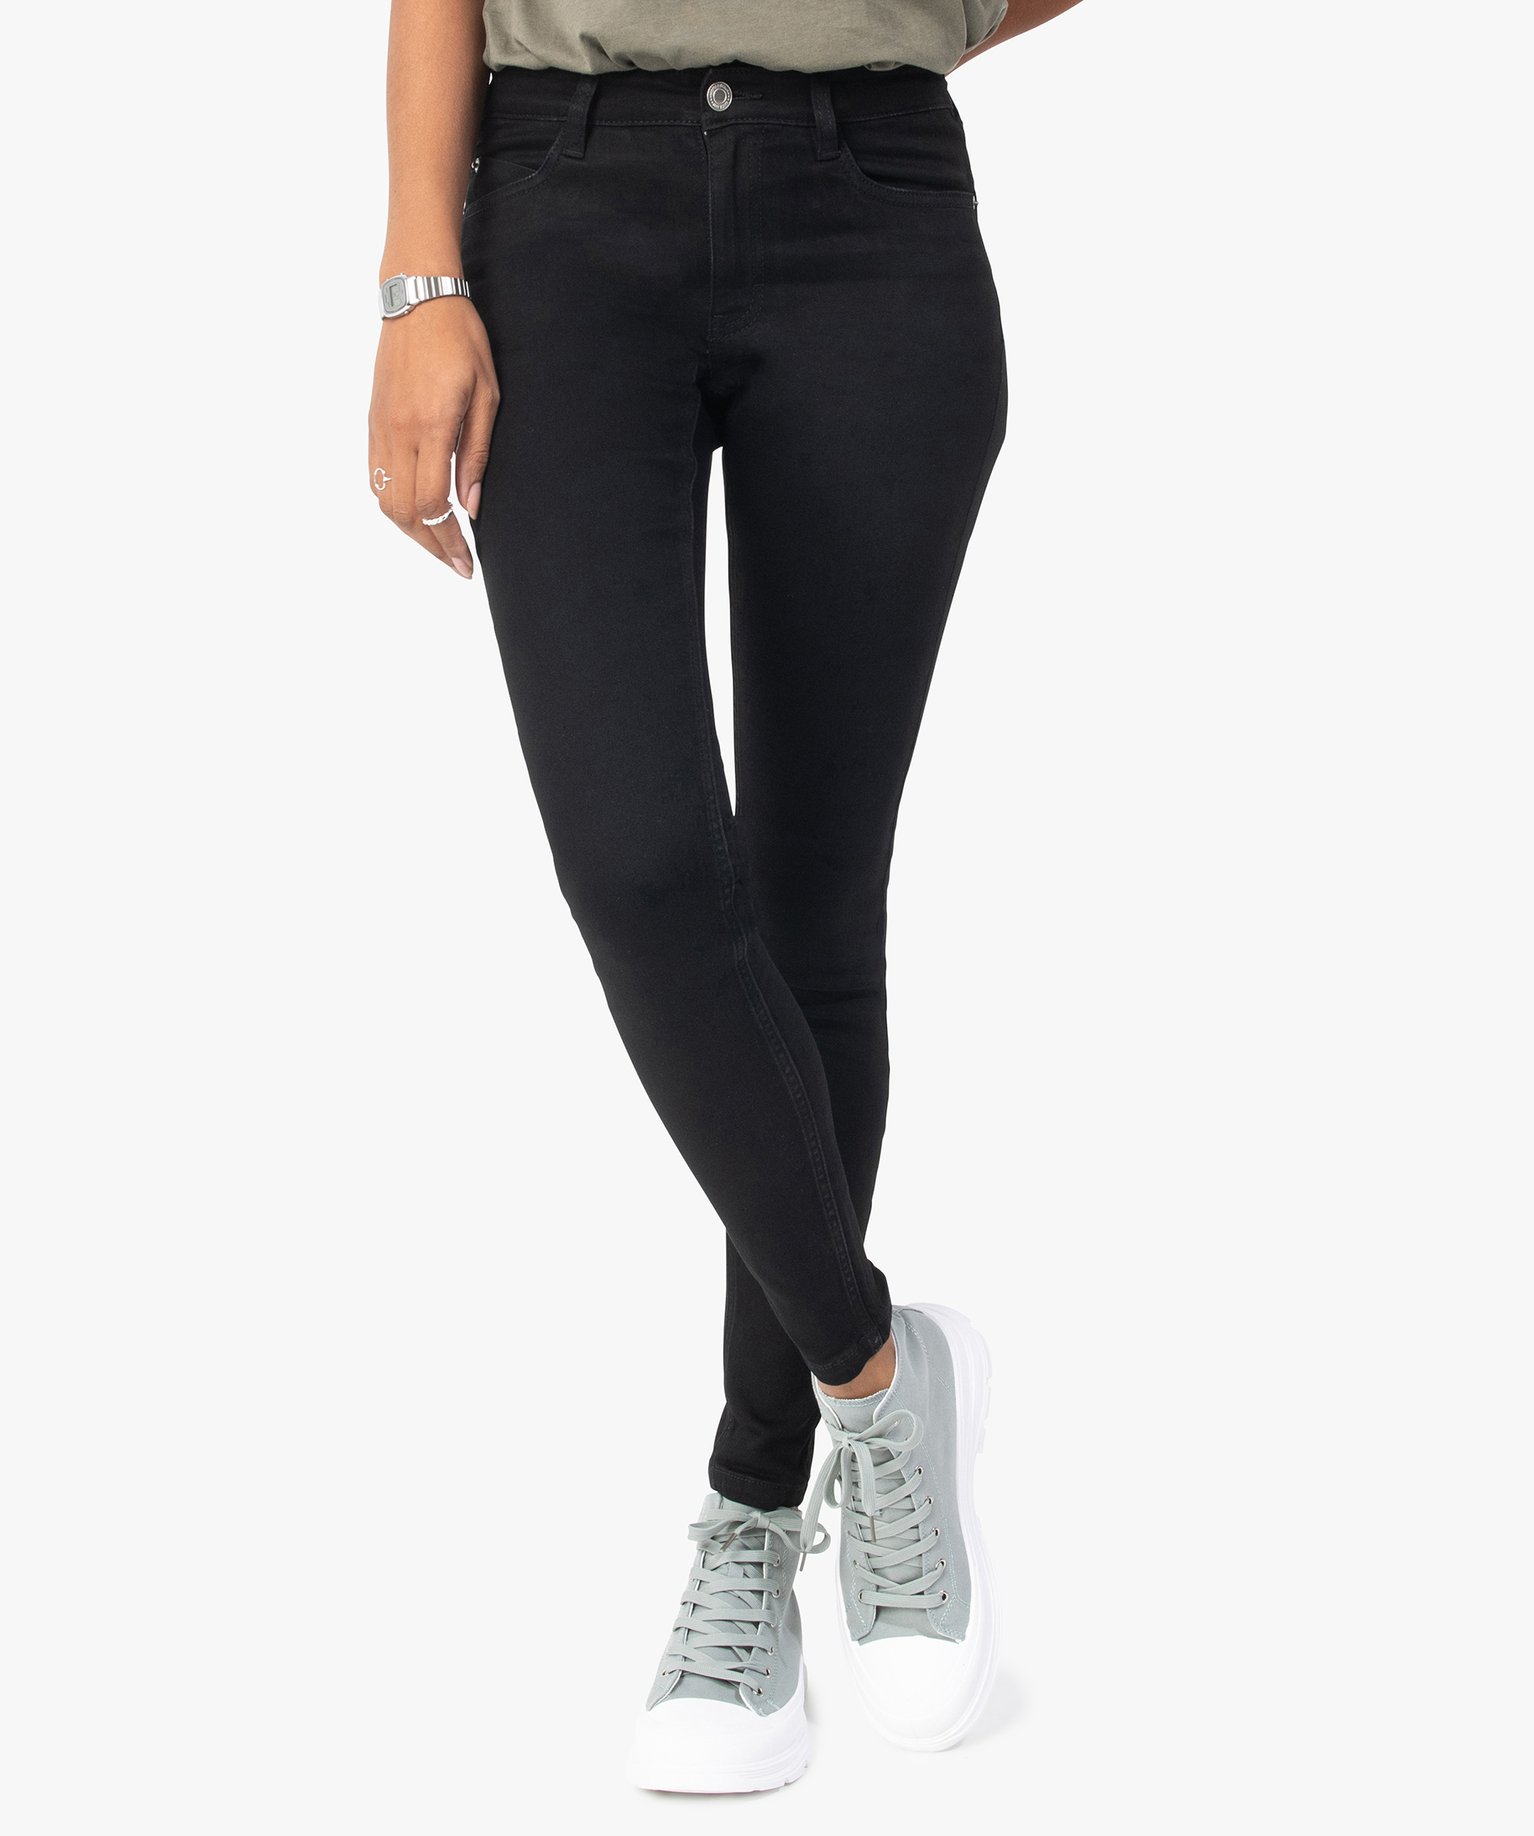 jean femme coupe skinny taille normale noir pantalons